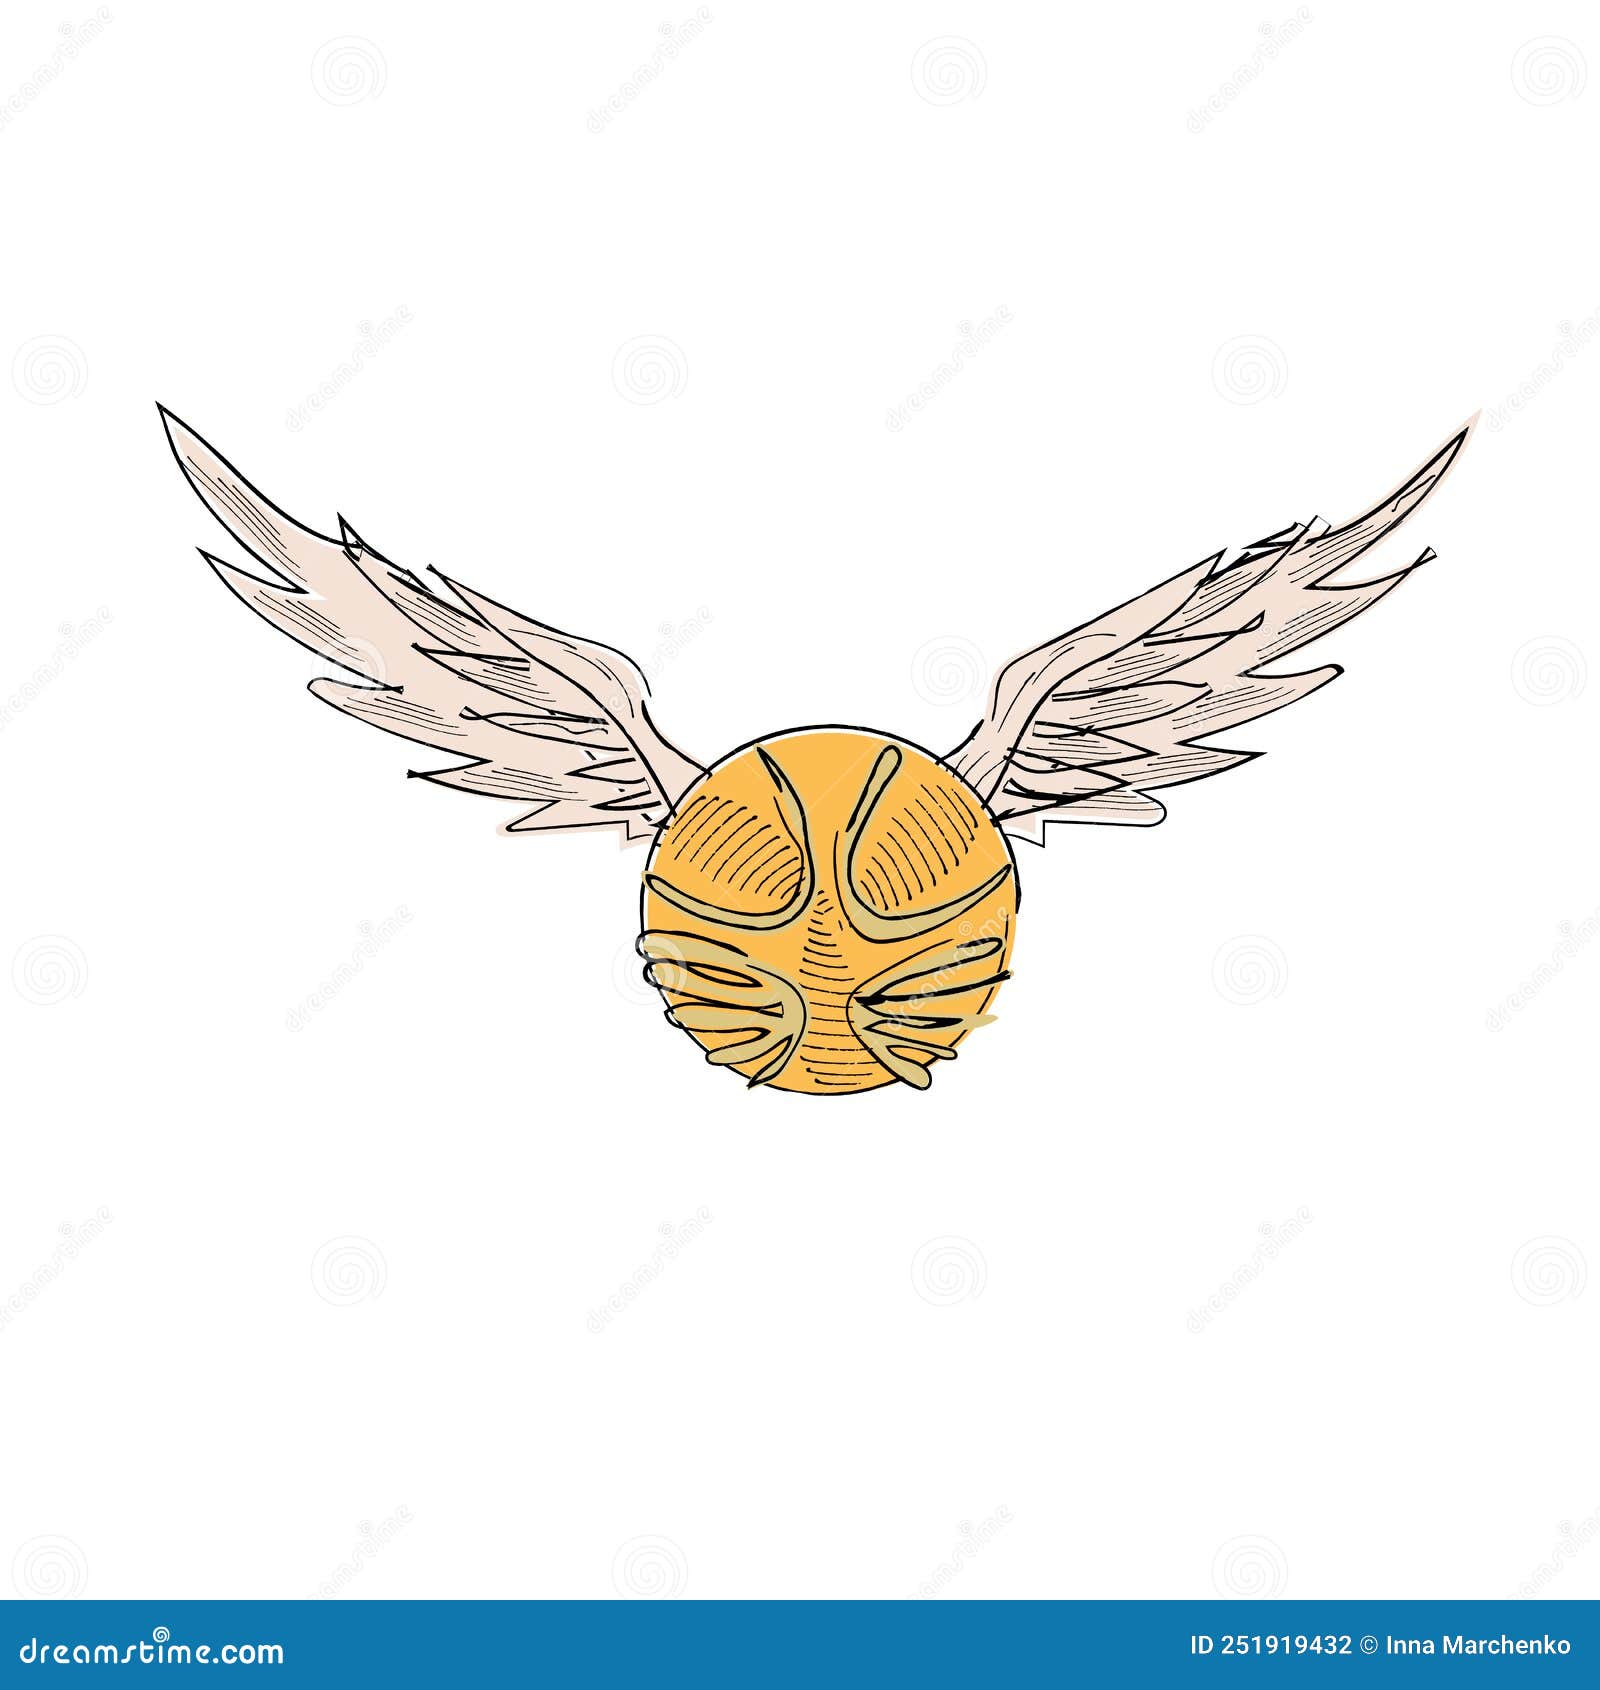 Golden snitch from the movie about harry potter Vector Image